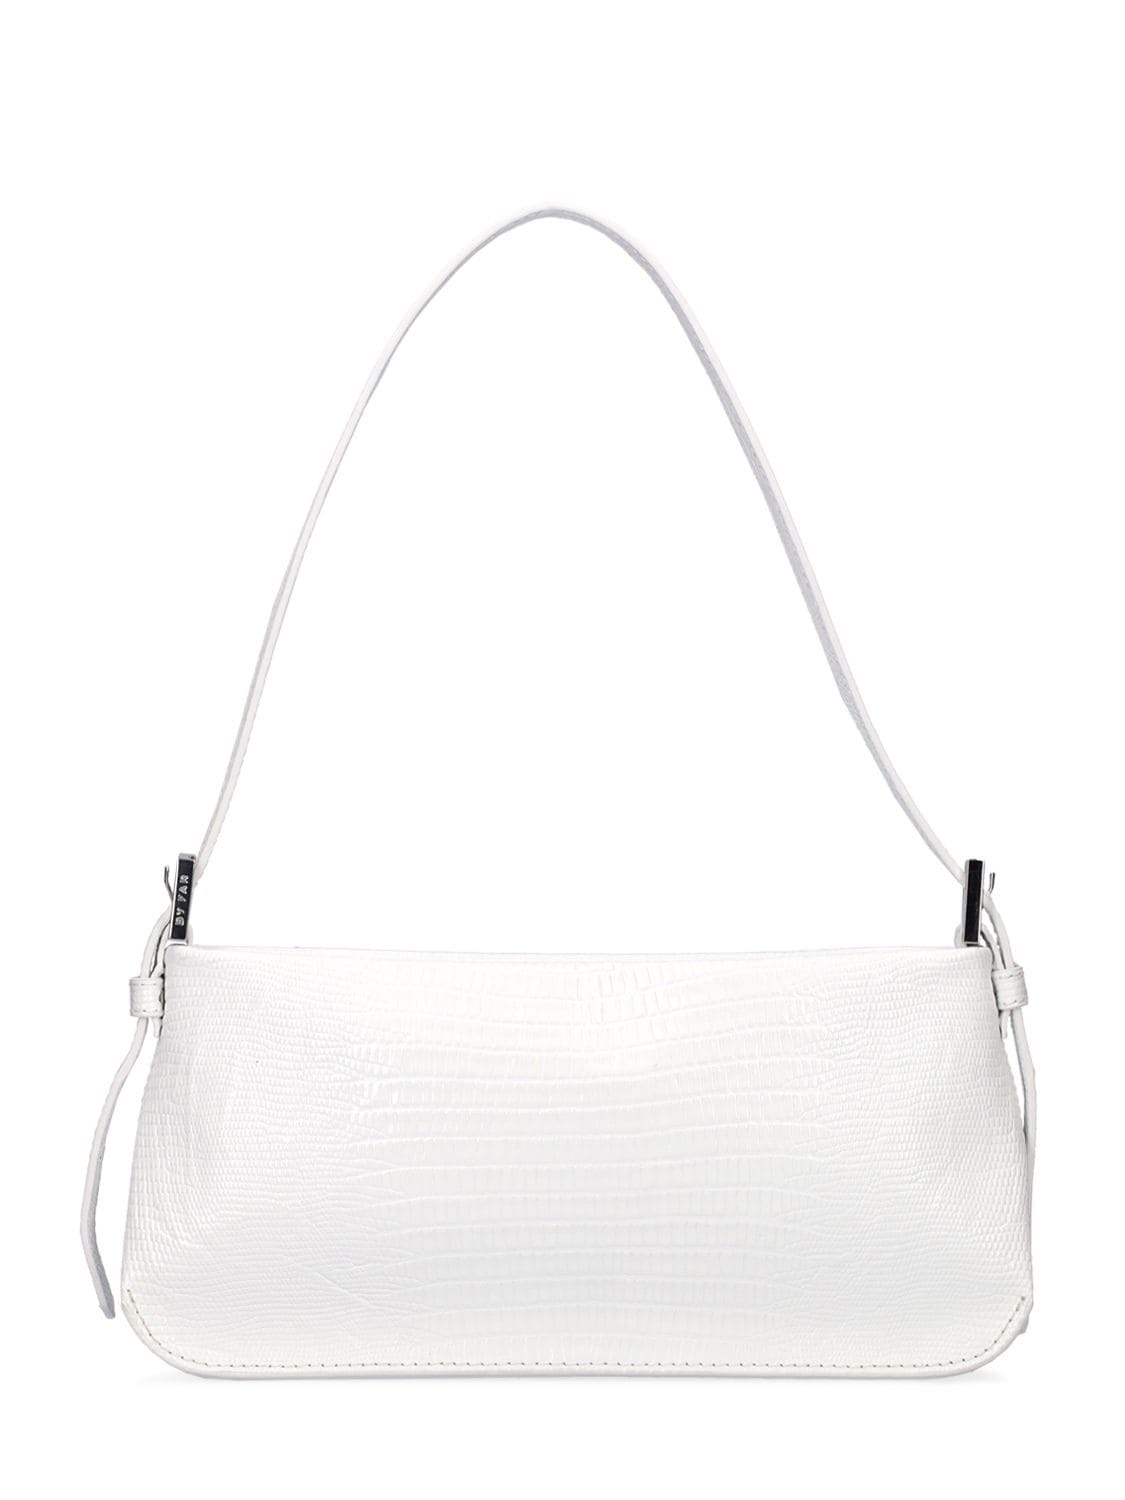 BY FAR Dulce Lizard Embossed Leather Bag in white